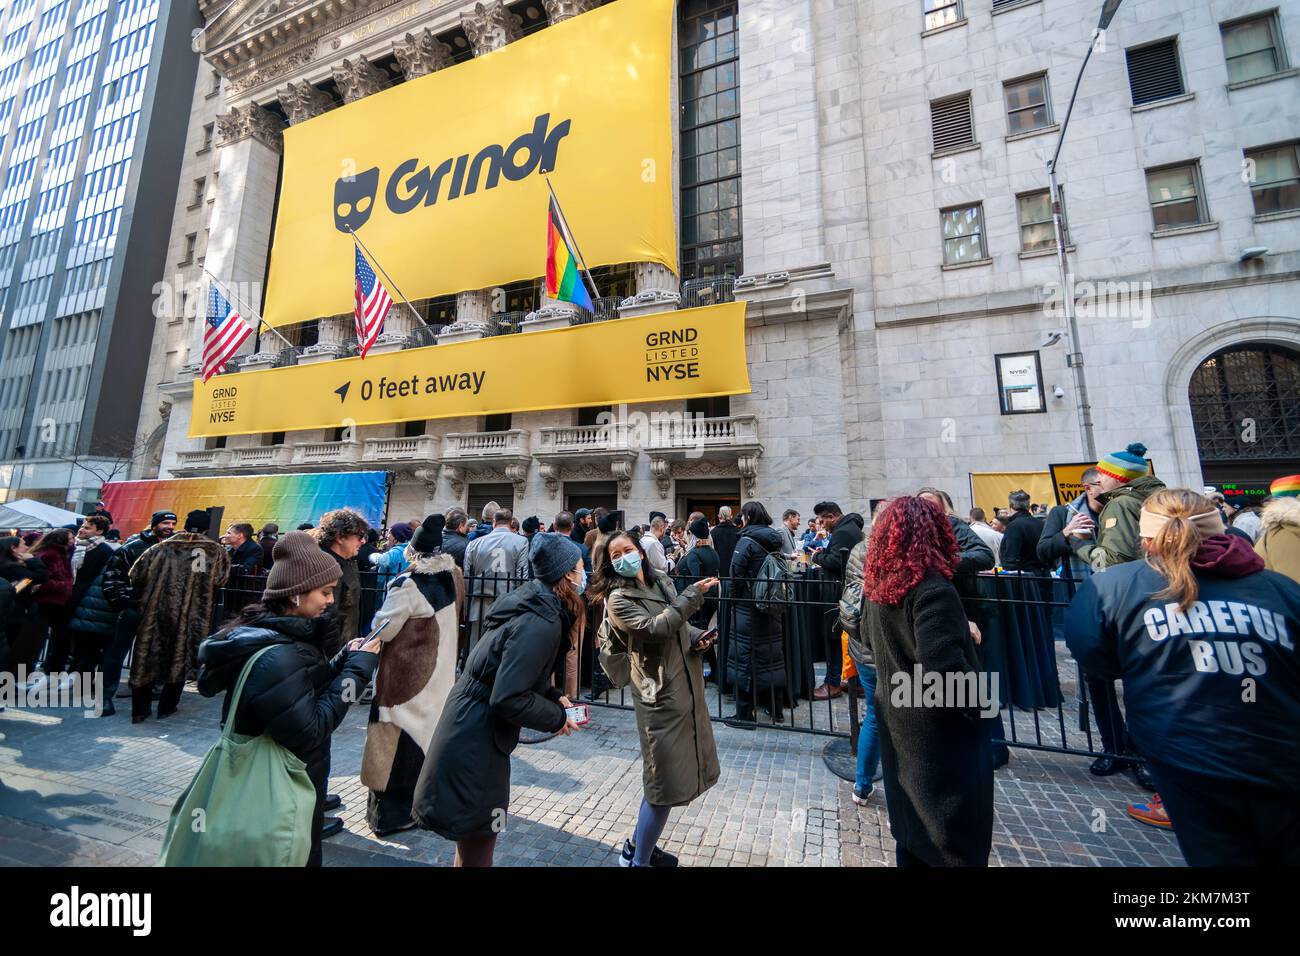 A banner on the facade looms over the hoopla in front of the New York Stock Exchange celebrating the SPAC of the Gay dating app Grindr in New York on Friday, November 18, 2022. Grindr will be listed on the exchange as GRND. (© Richard B. Levine) Stock Photo